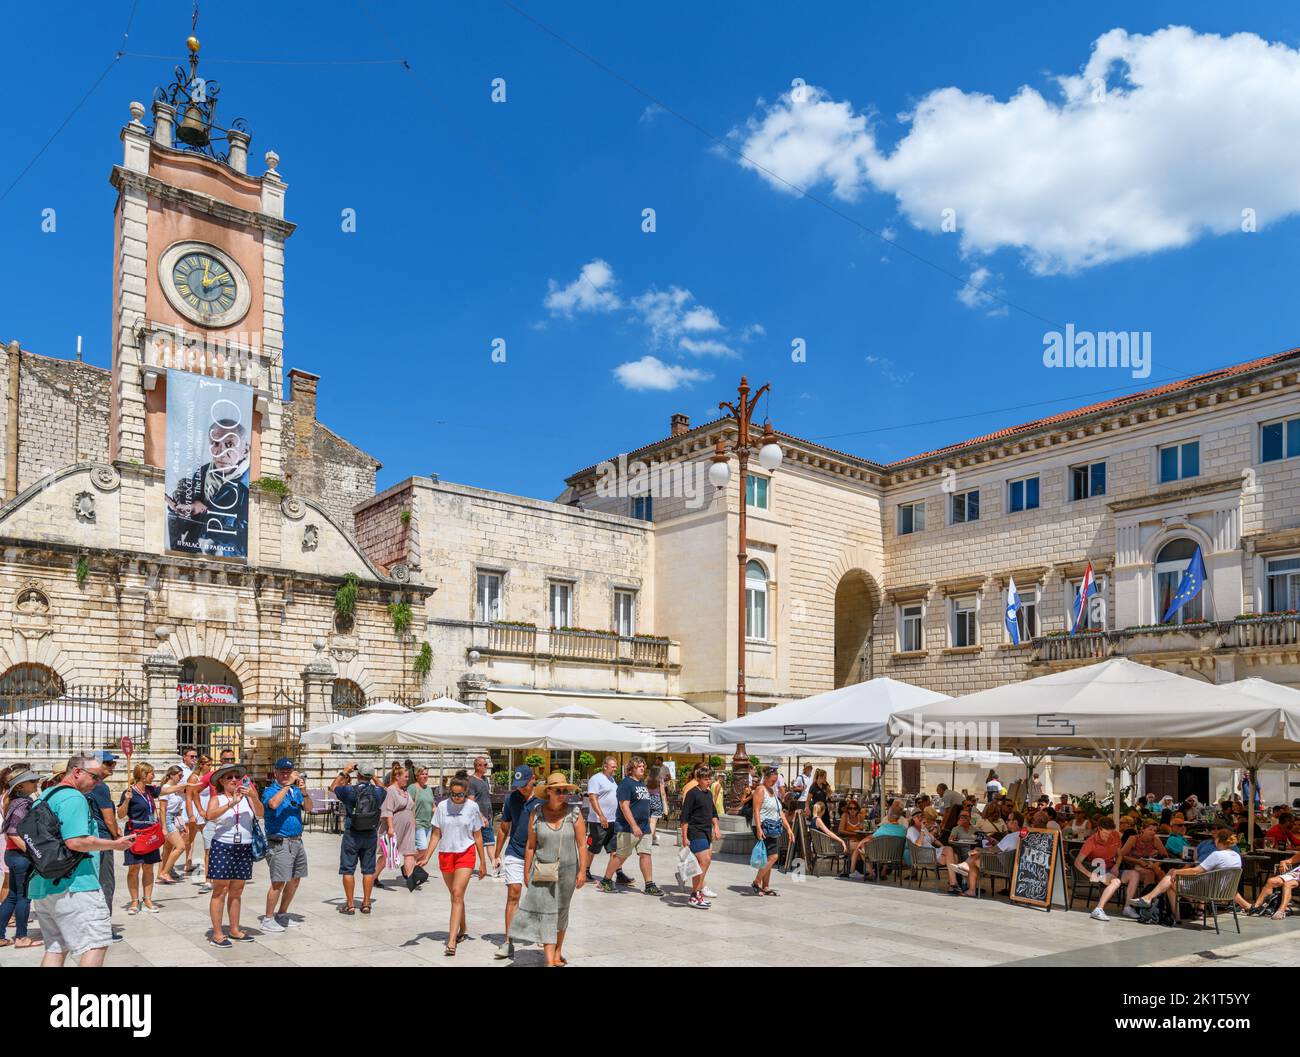 Cafes, bars and restaurants on Narodni trg  (People's Square) in the historic old town, Zadar, Croatia Stock Photo